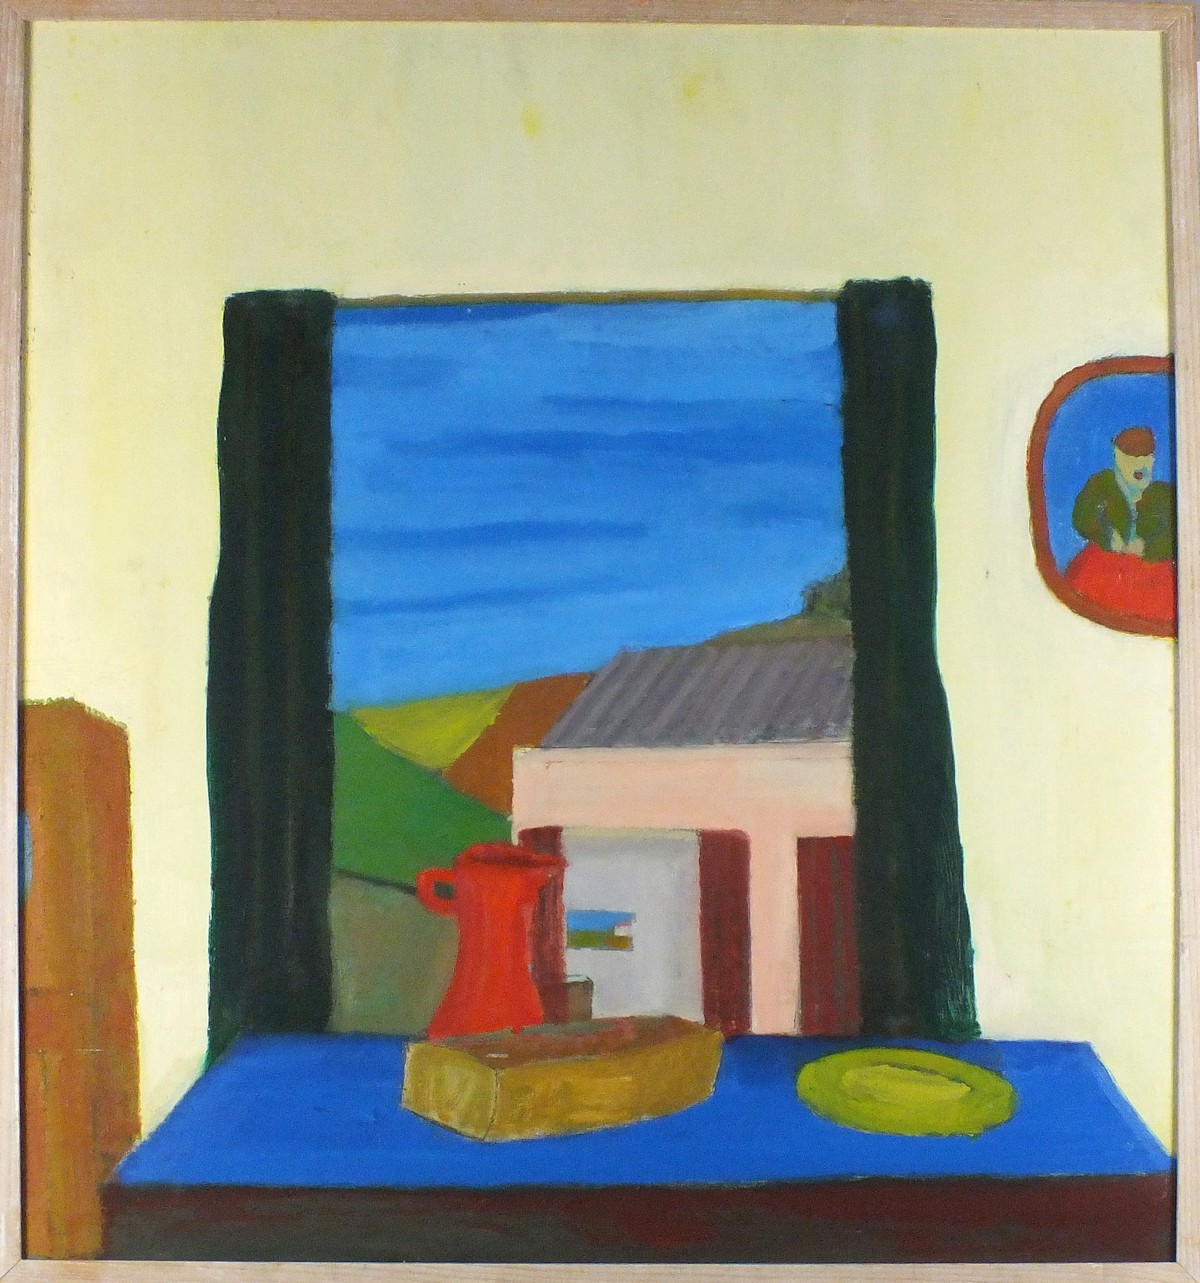 Bob BOURNE (British b. 1931) Blue Table and Red Jug, Oil on board, Inscribed with title verso, 31.5" - Image 2 of 2